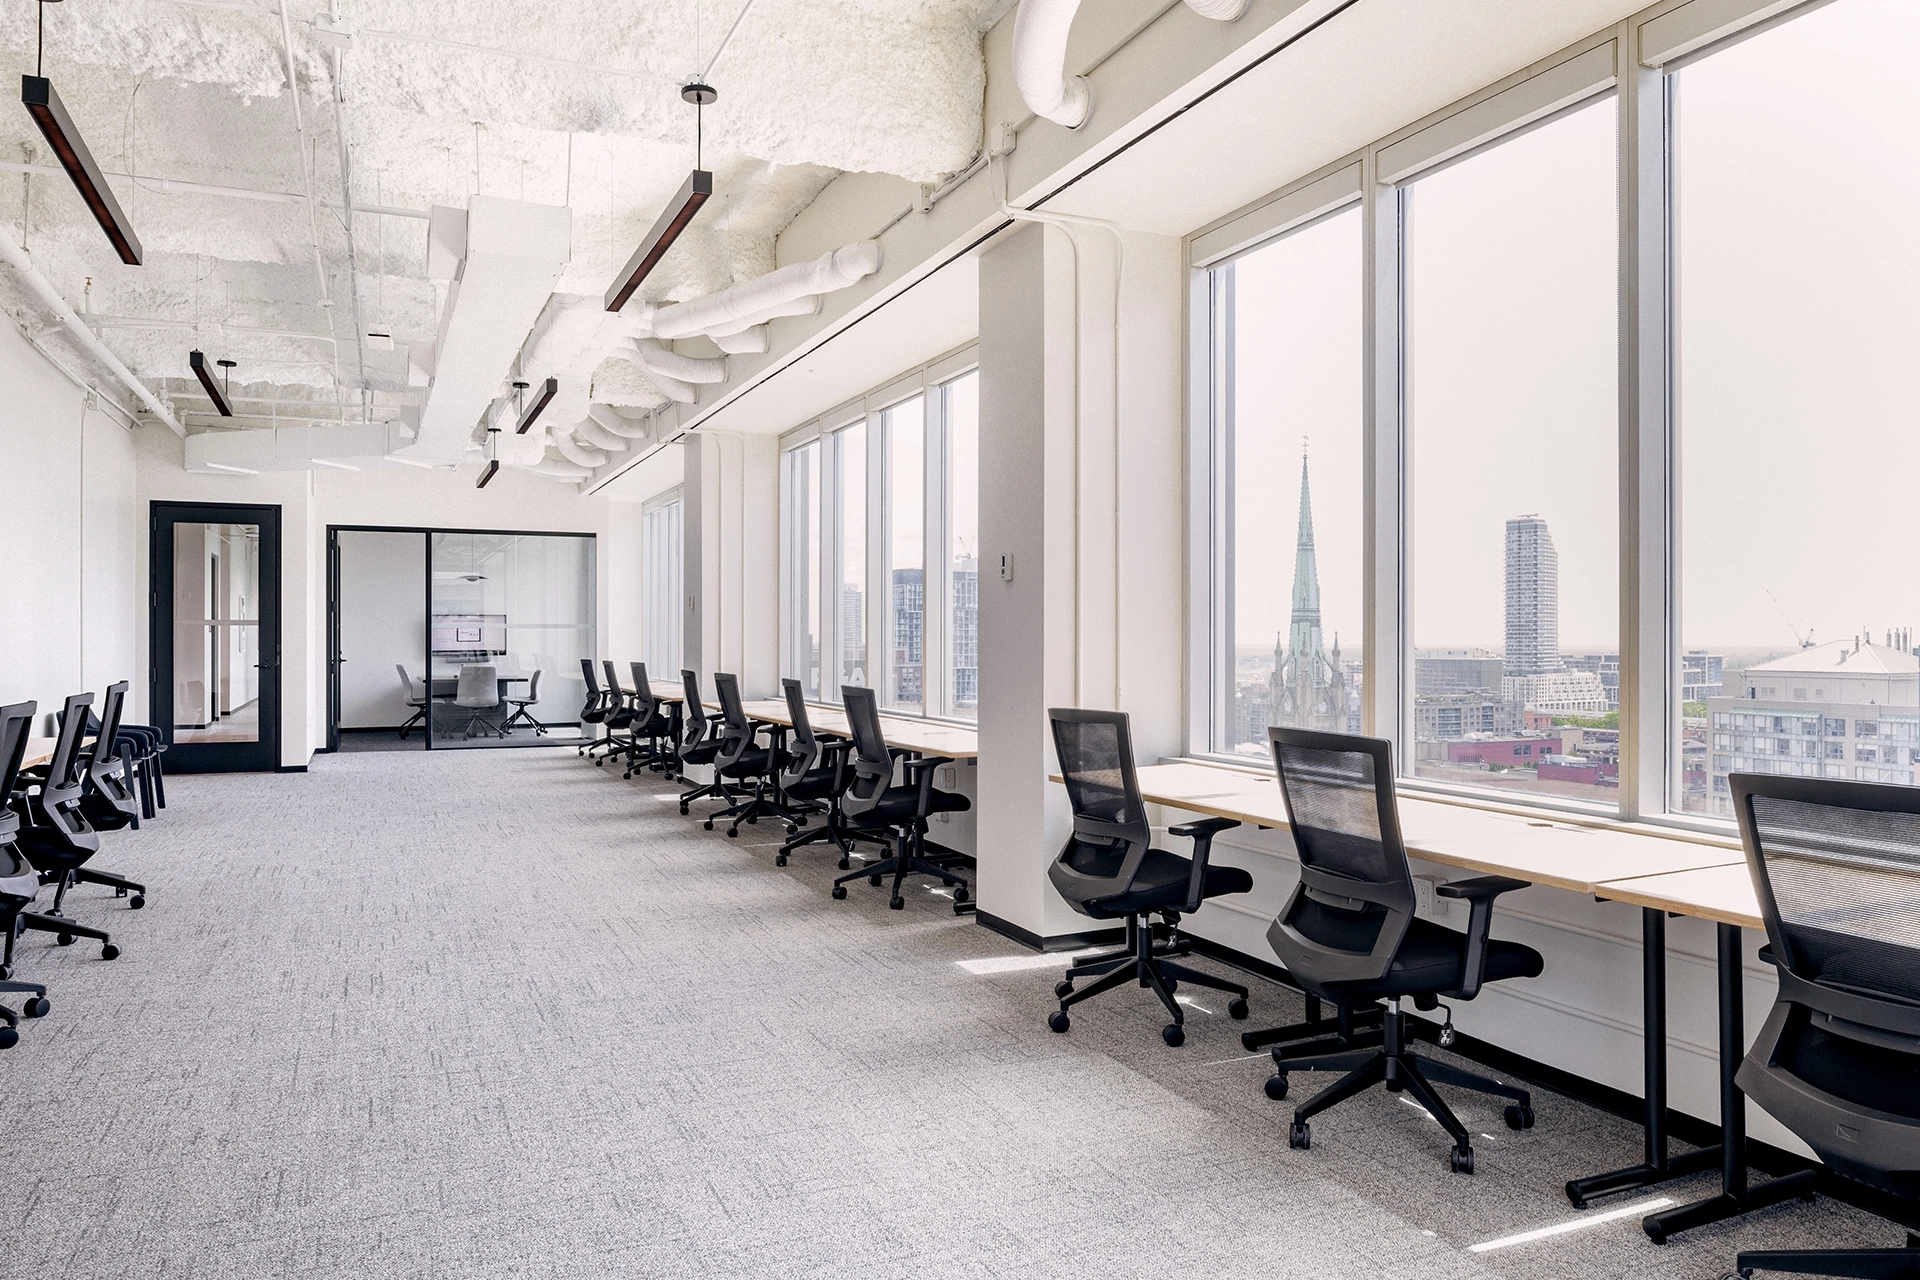 An expansive Toronto office equipped with numerous desks and chairs.